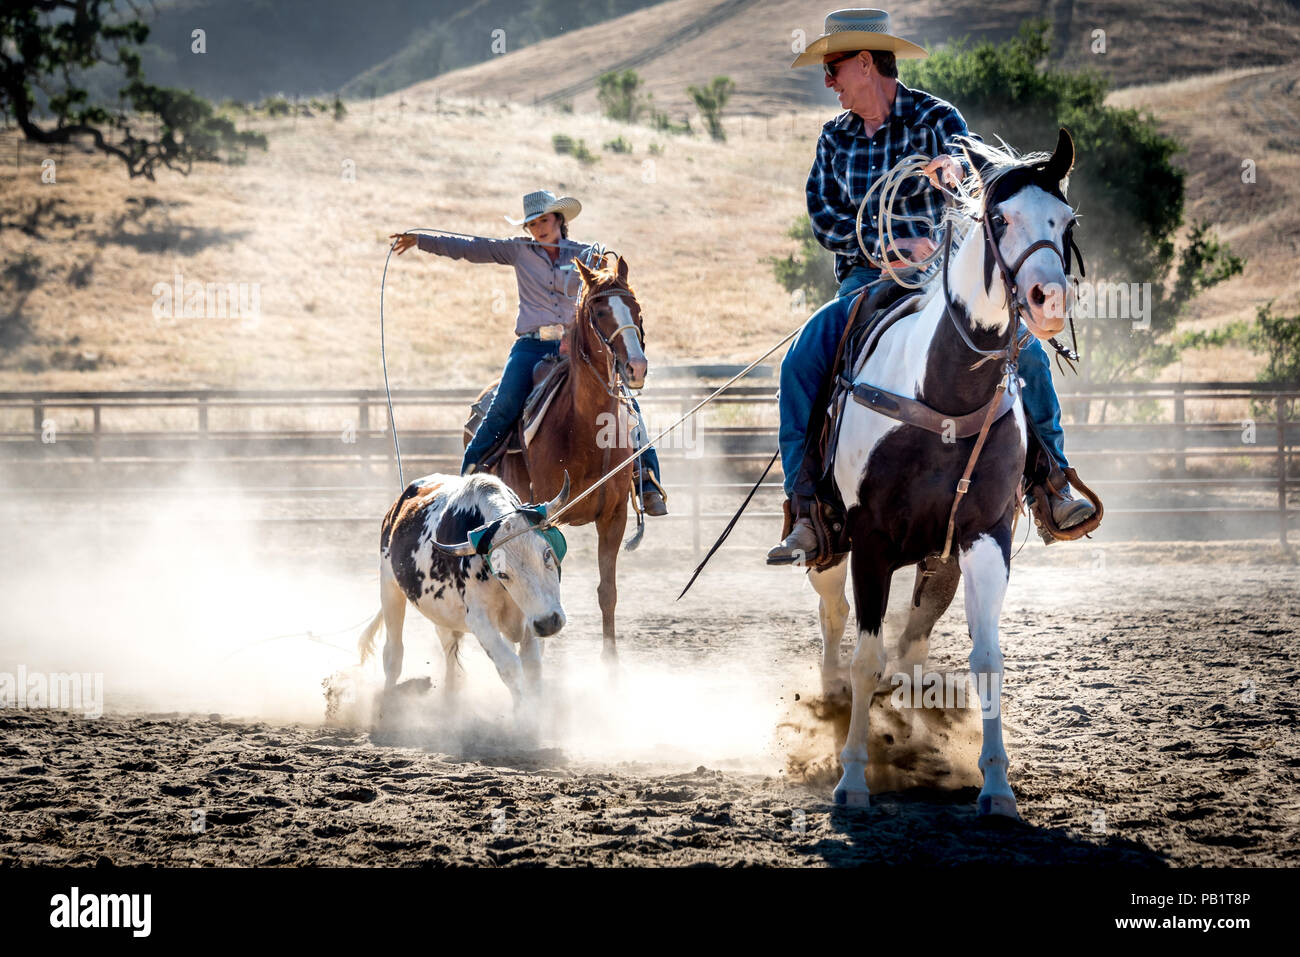 Cattle roping steer at a rodeo, a woman lassos back leg while a cowboy holds his rope from horseback. Stock Photo